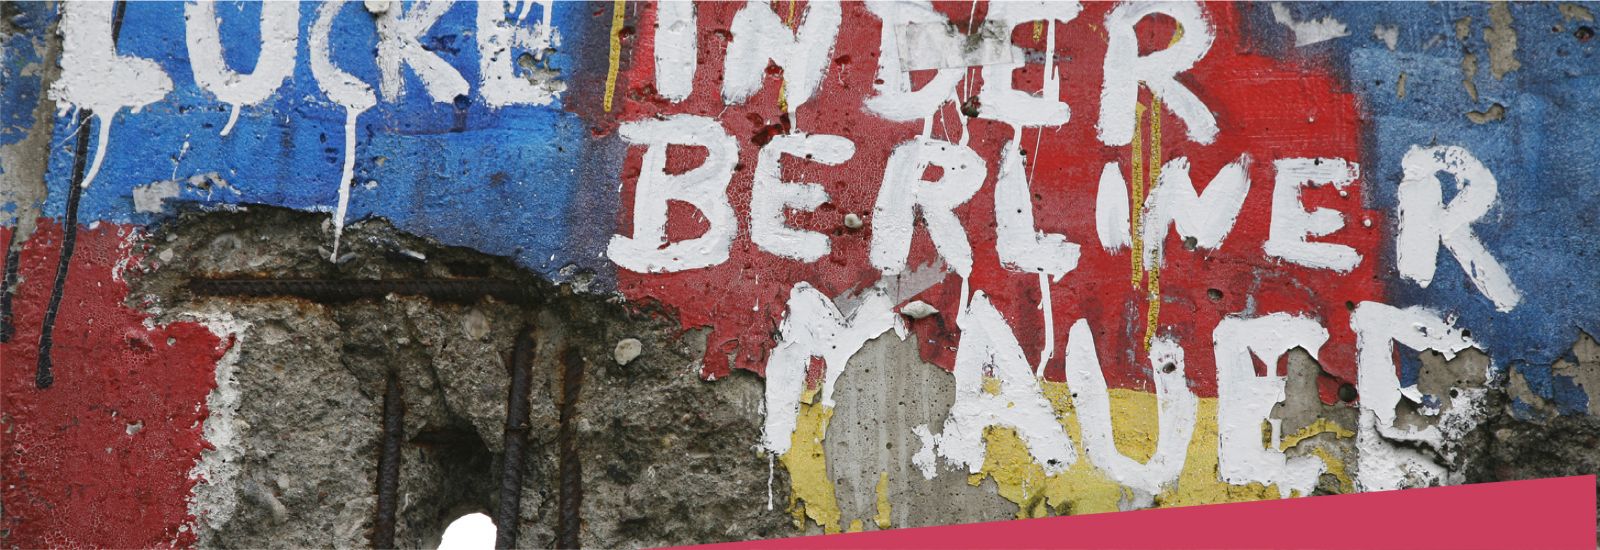 Graffiti on one of the remaining sections of the Berlin wall, Germany.